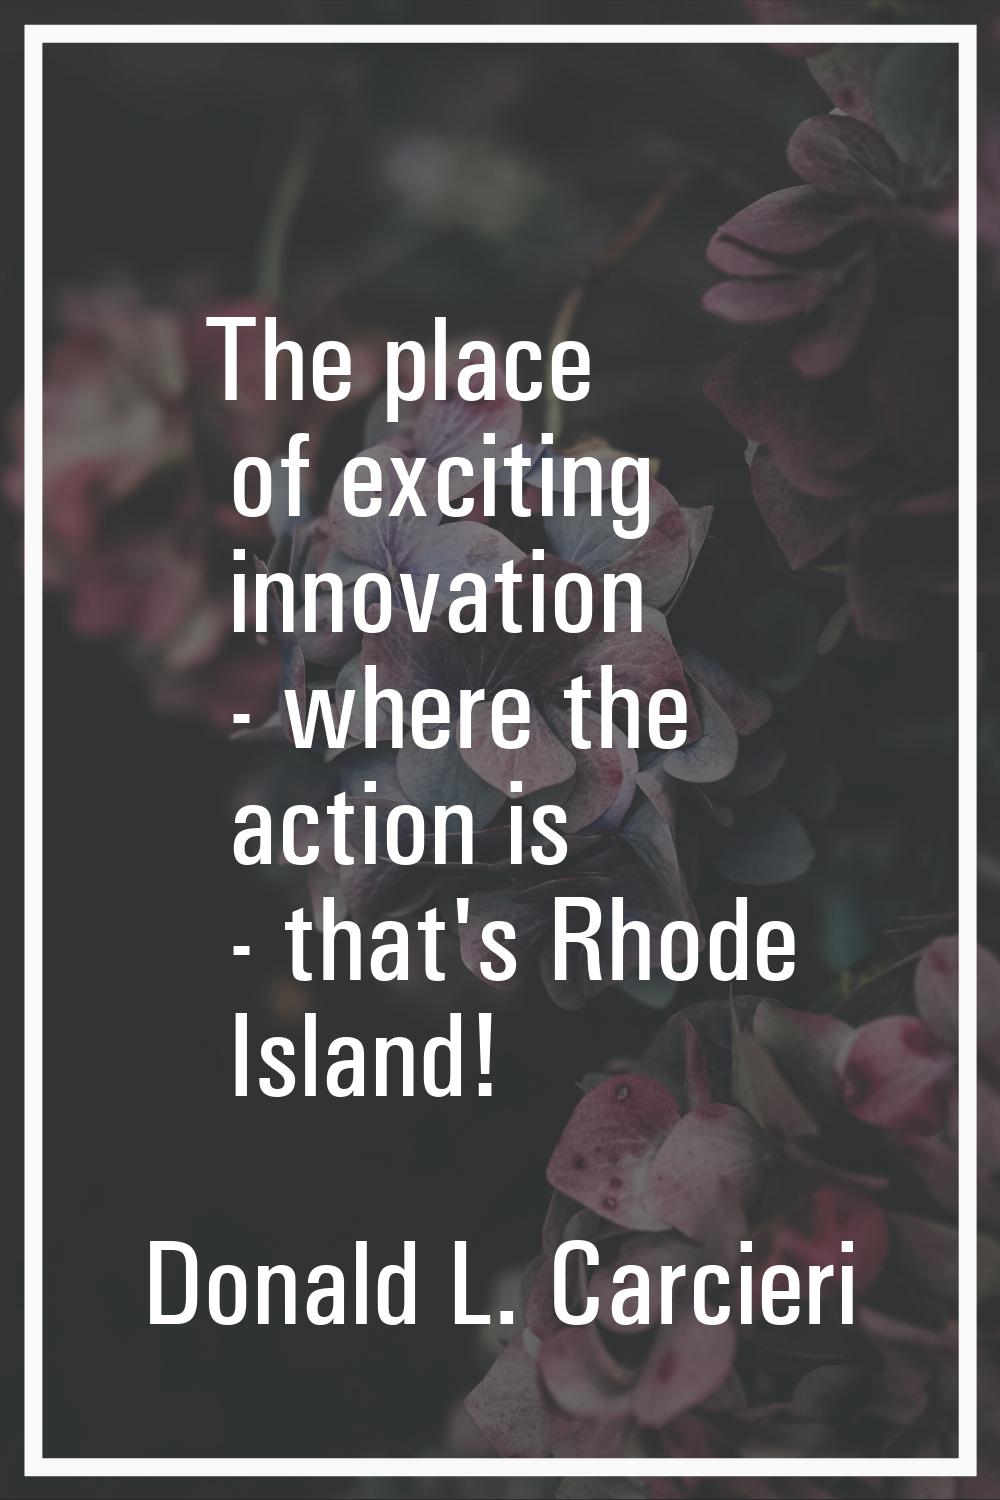 The place of exciting innovation - where the action is - that's Rhode Island!